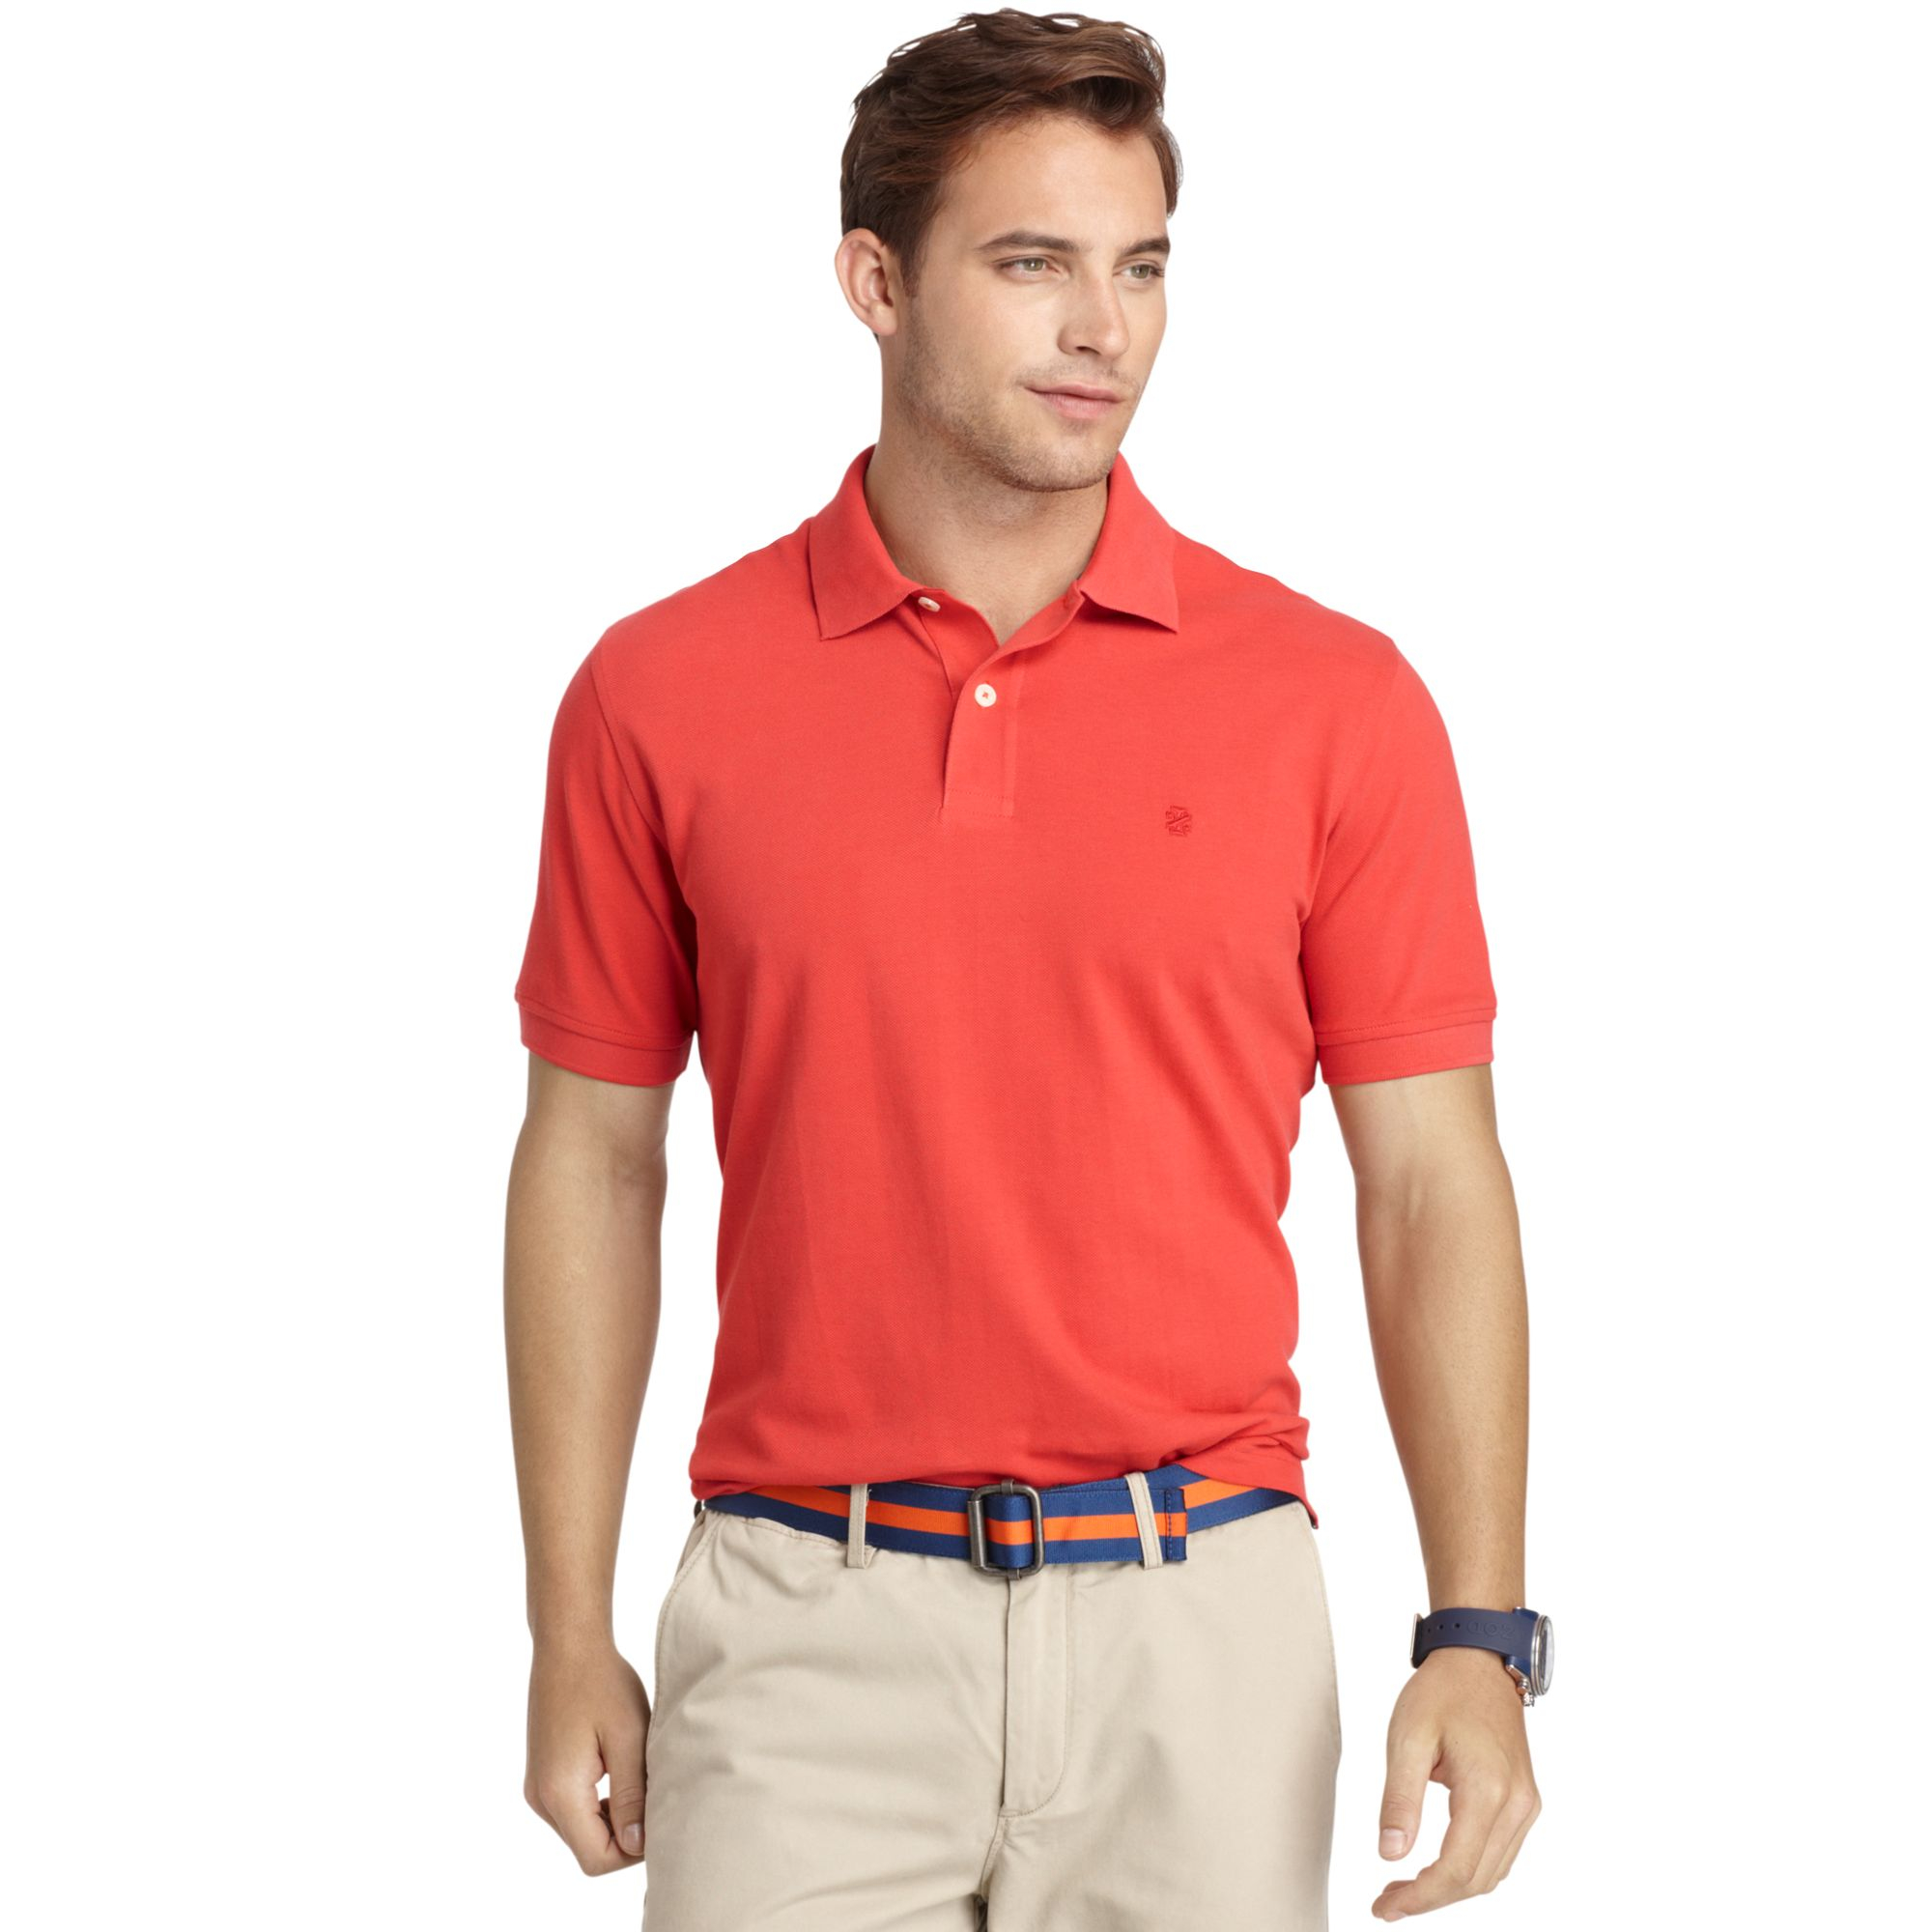 Lyst - Izod Shirt Premium Pique Polo Shirt in Red for Men